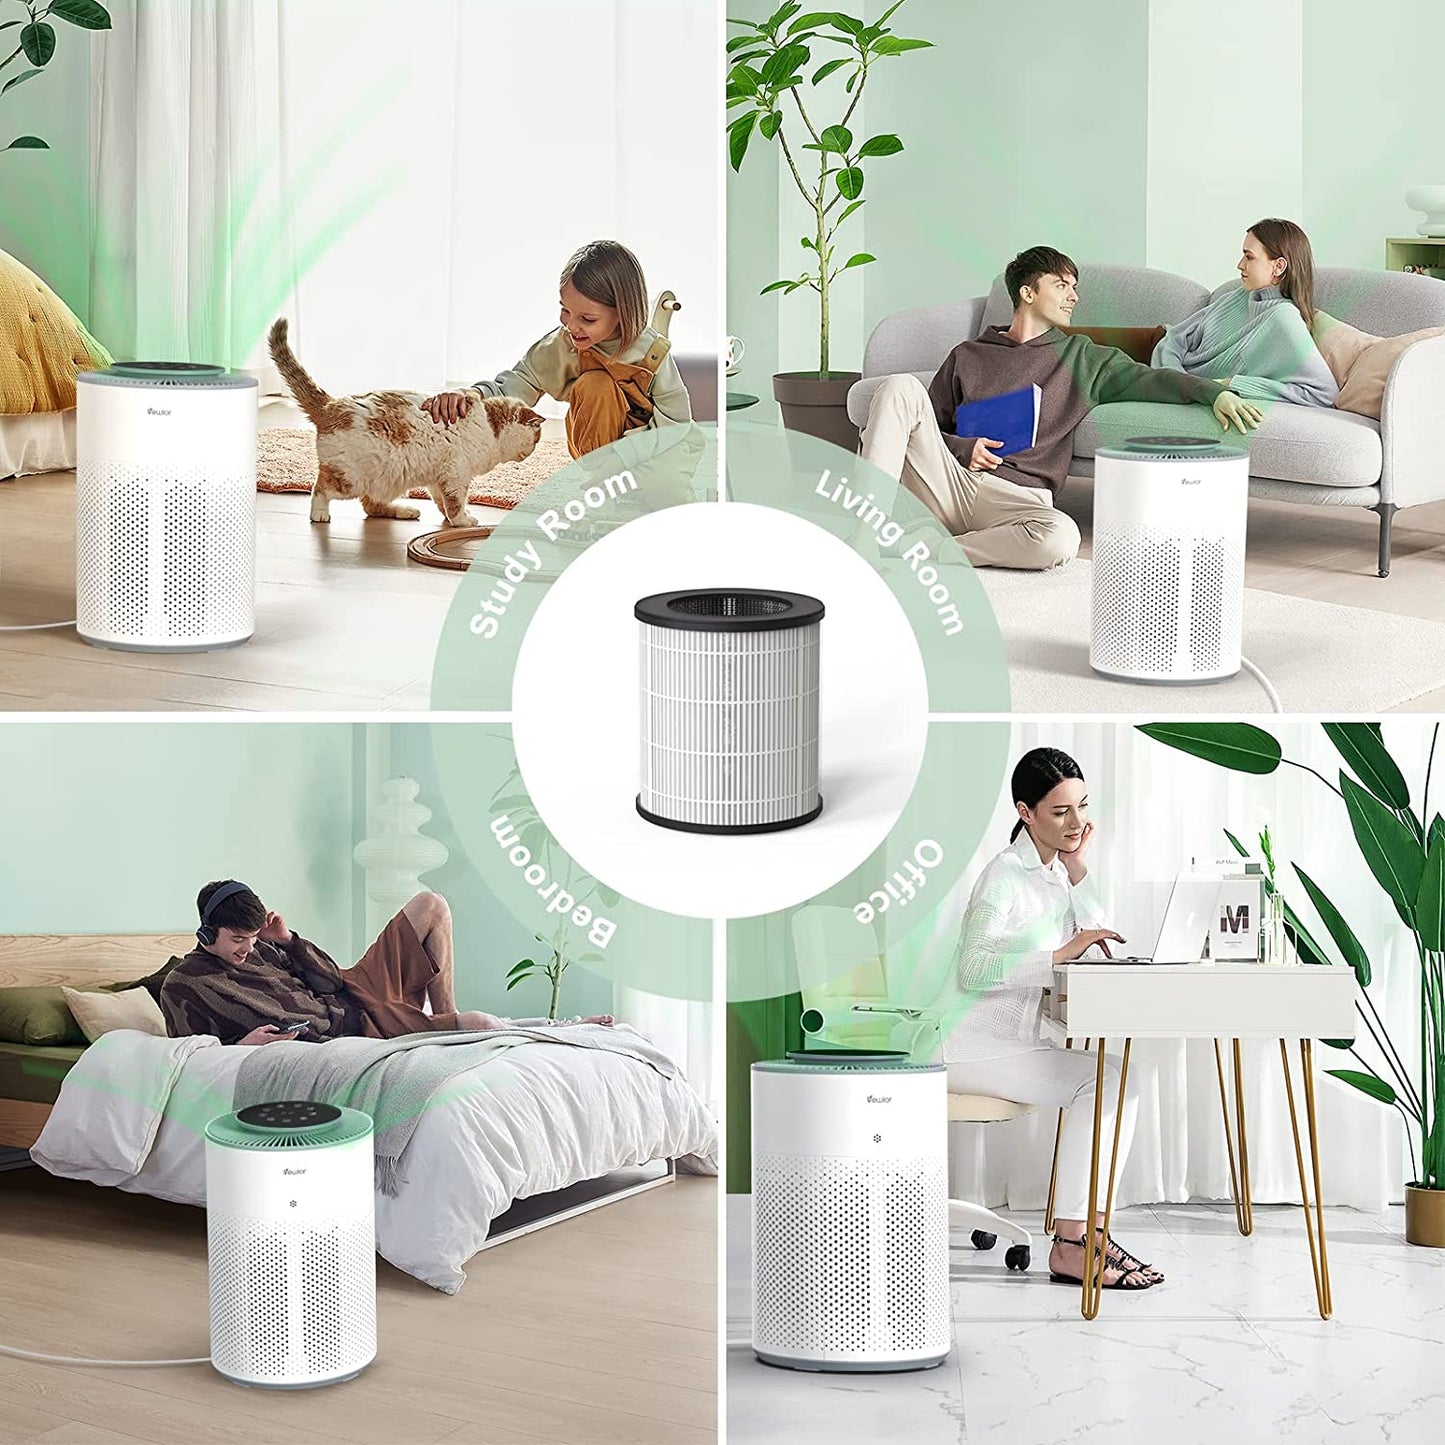 Air Purifier A2 Replacement Filter, VEWIOR H13 True HEPA Air Cleaner Filter, High-Efficiency Activated Carbon, Remove up to 99.97% of Particles Vewior